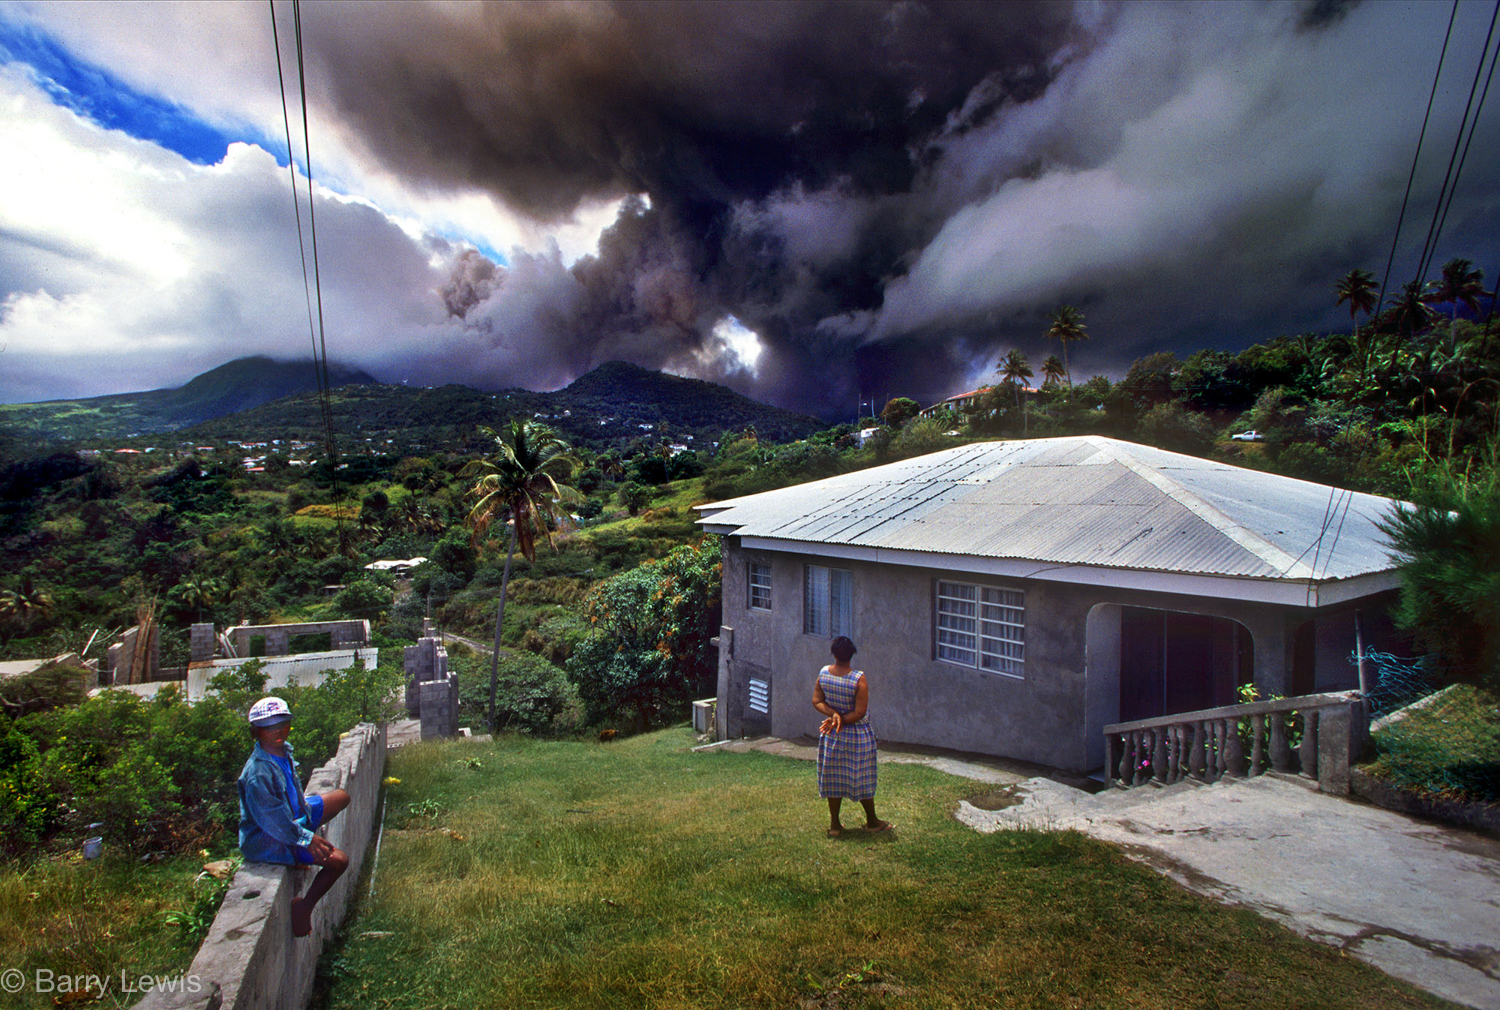  Family watching the eruption of  Chances Peak volcano in the Soufriere Hills, Monserrat, 1997.
Two-thirds of the population left Montserrat; the majority went to the UK.. 